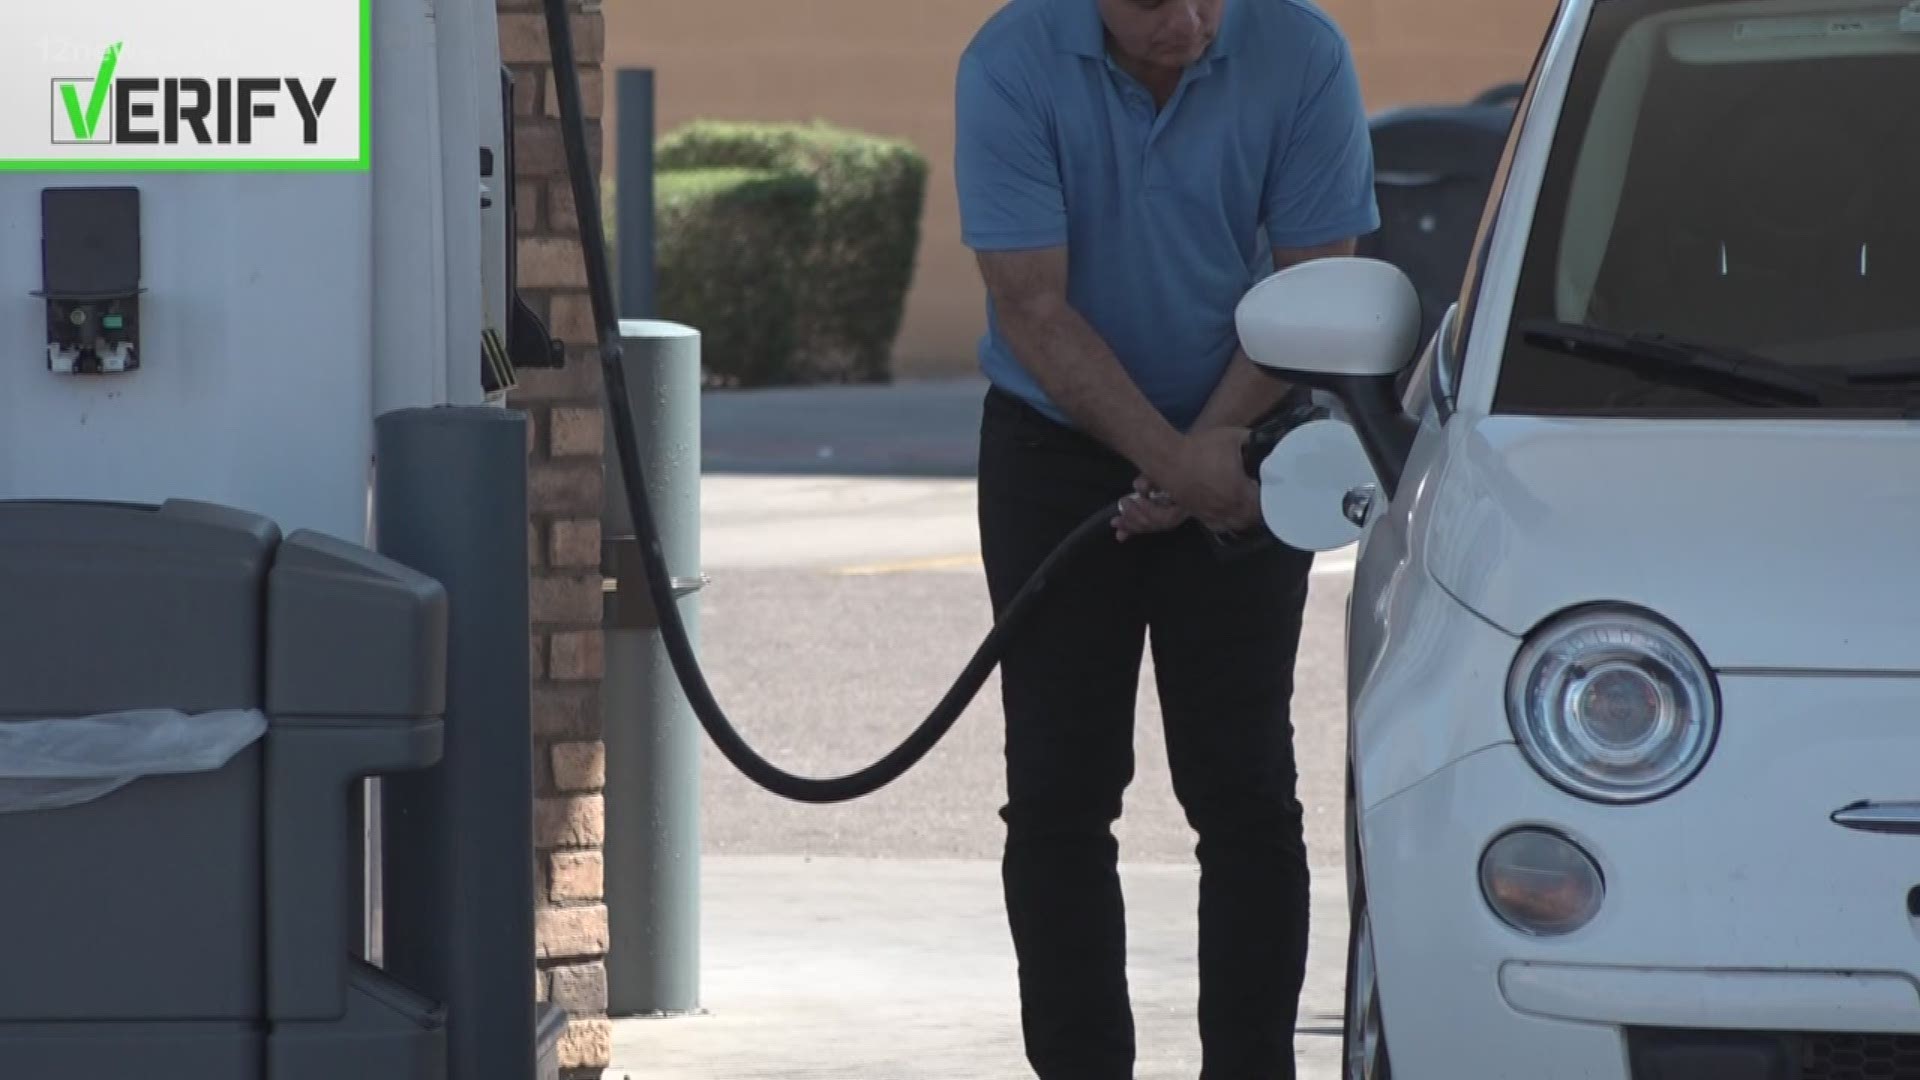 The pain at Circle K pumps in Arizona is real! The company is blaming a "perfect storm" of events. We verify the facts that created the shortage.